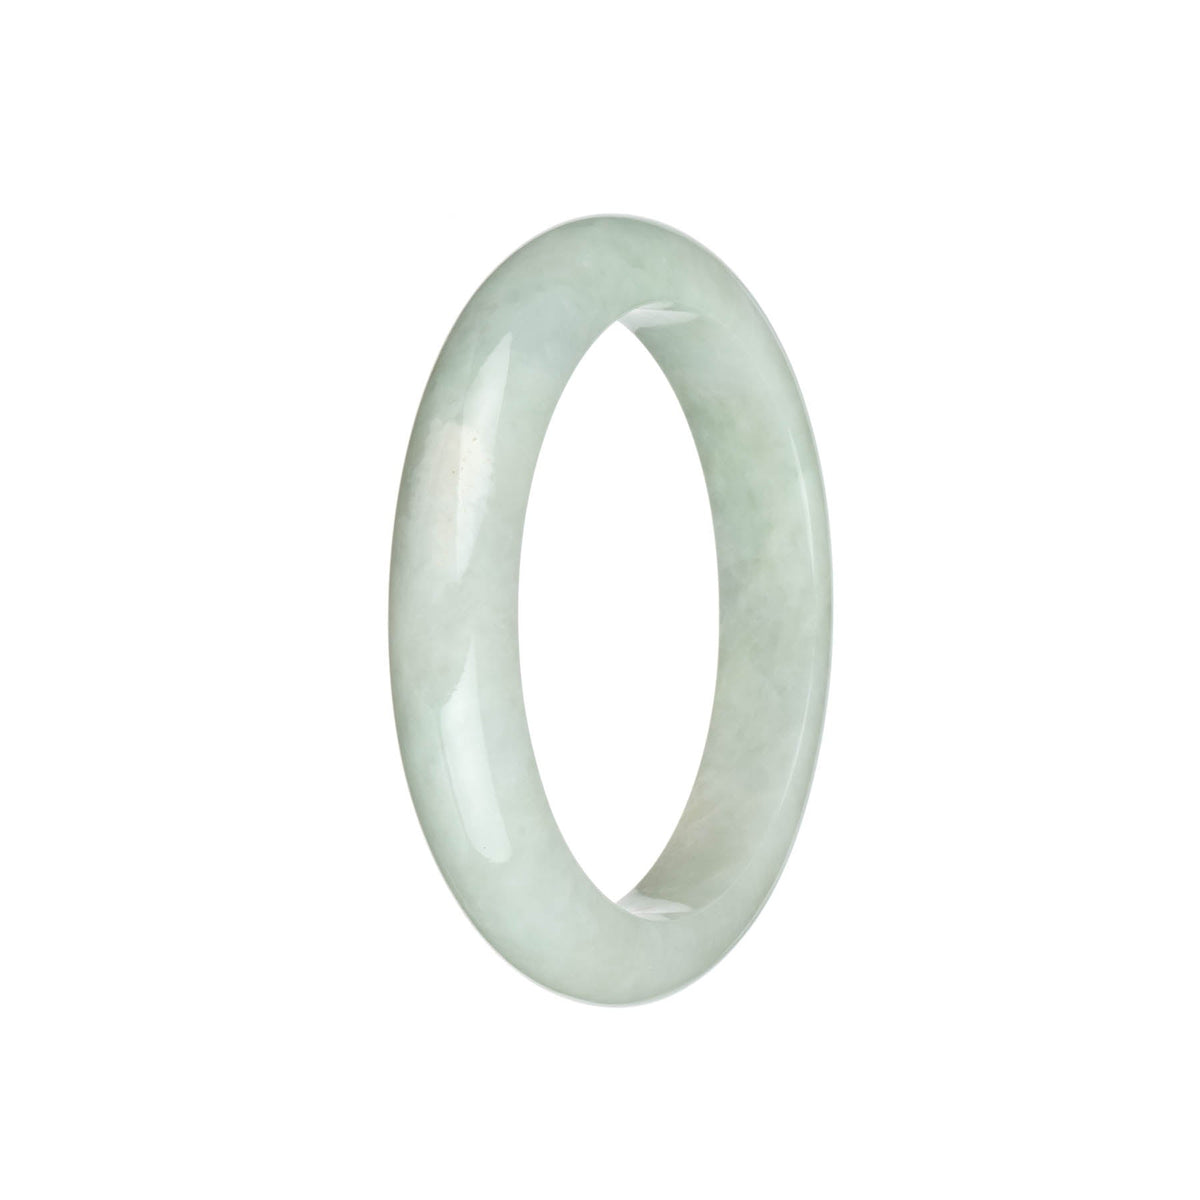 A beautiful pale green Burmese Jade bangle bracelet with a white patch. The bracelet is certified Grade A and has a semi-round shape, measuring 59mm in diameter. Designed by MAYS™.